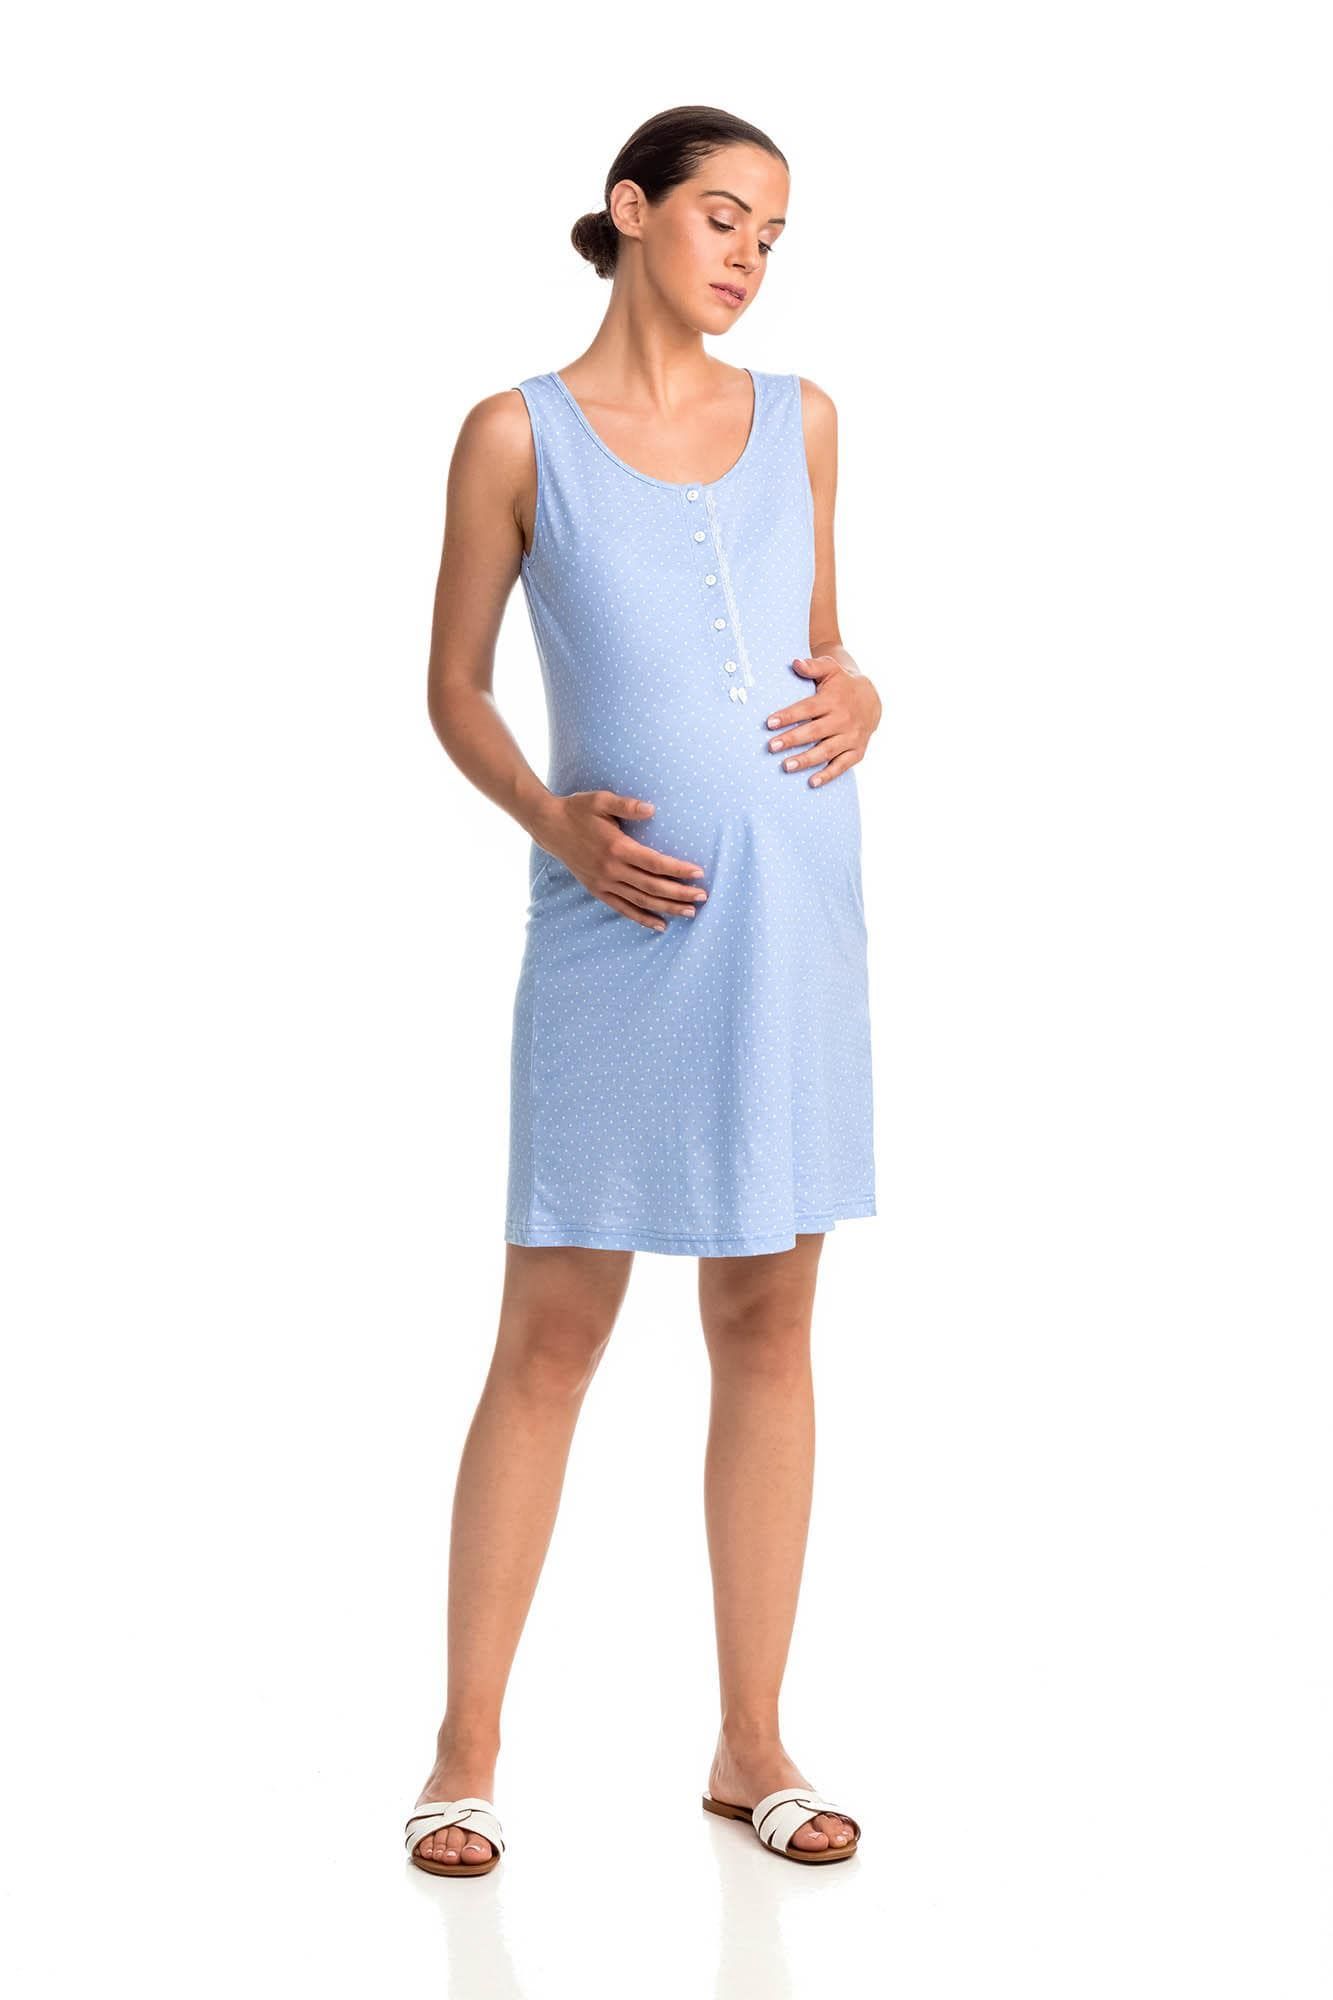 Sleeveless Polka Dot Nightgown with Buttons